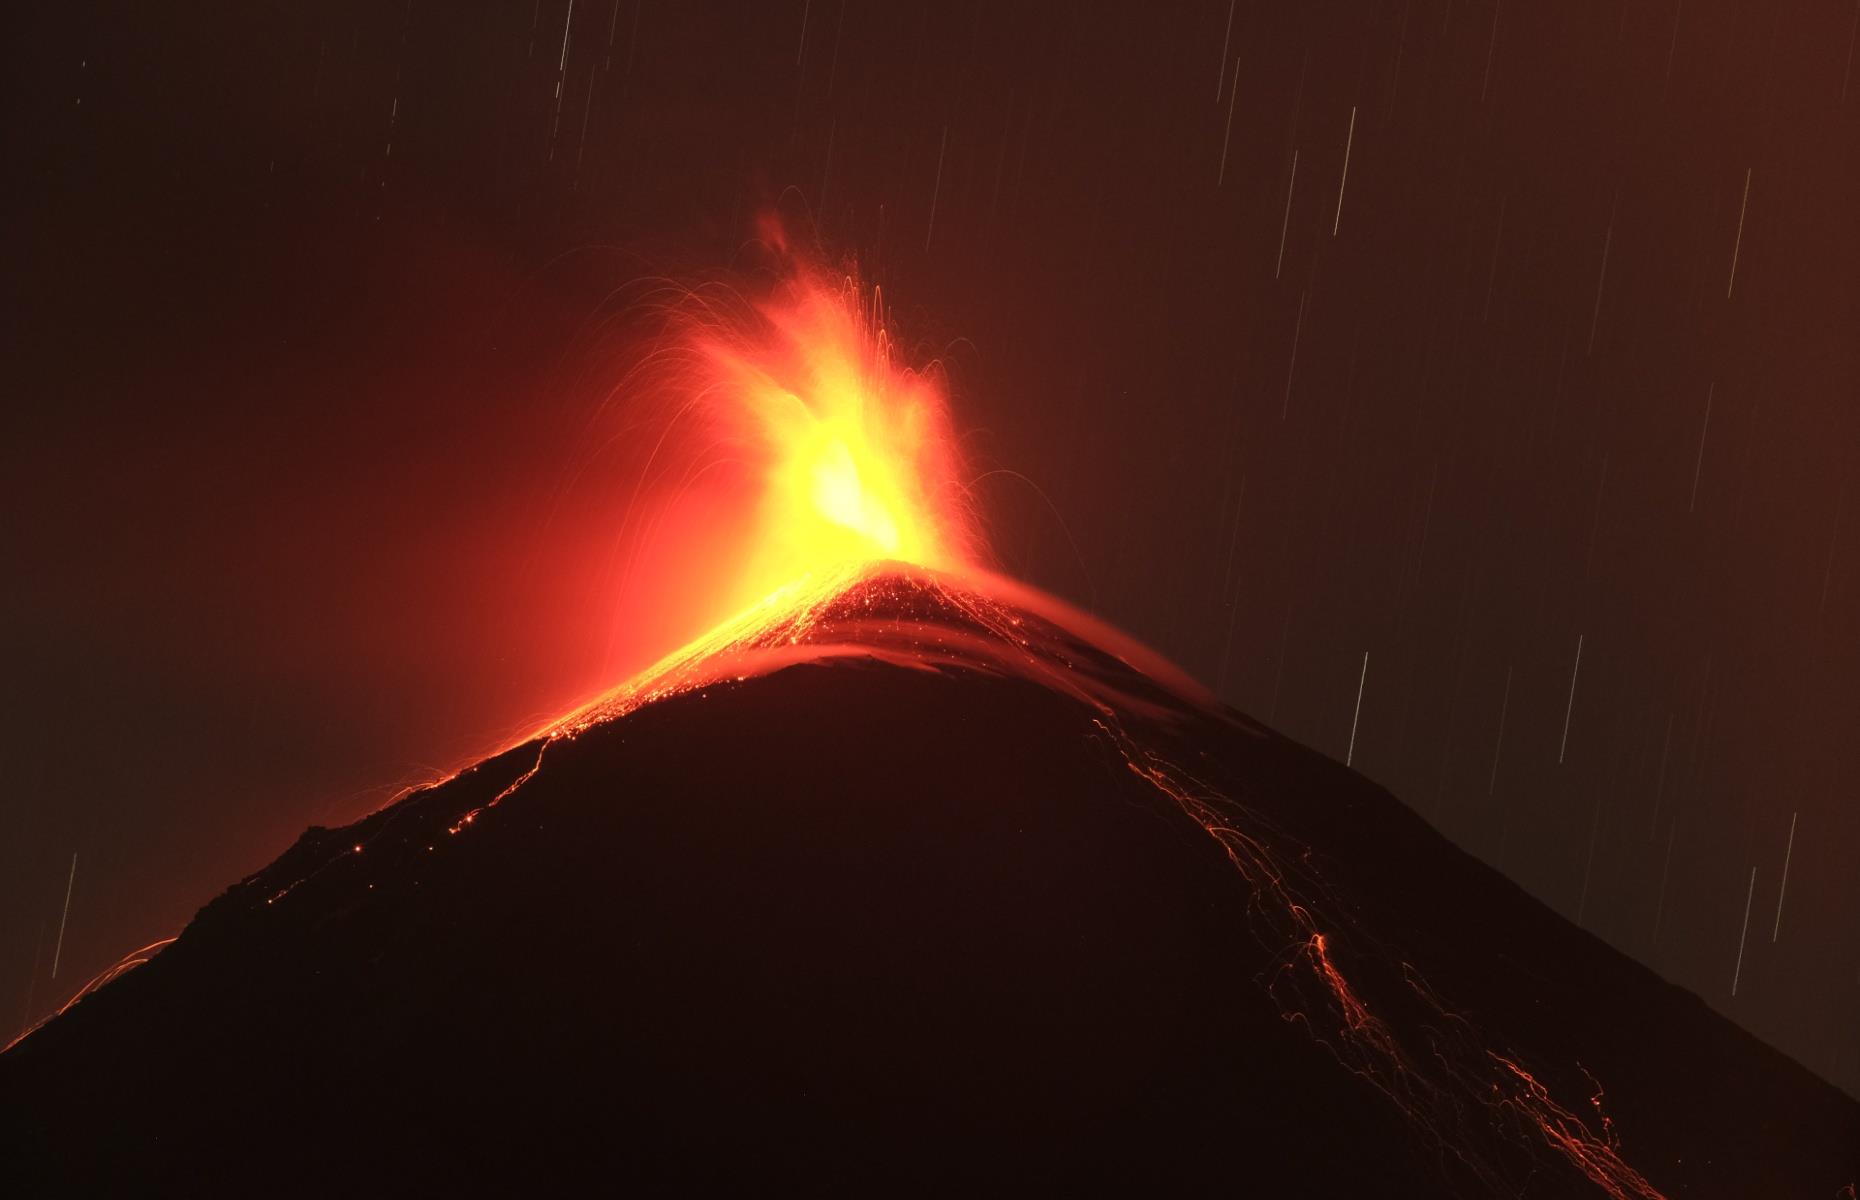 The Guatemalan giant began to eject pillars of ash into the air on 4 March 2021, continuing to erupt the following day. Its eruptions are strombolian, which means the blasts themselves are relatively tame, but they throw out bombs of lava and burning cinders. Pacaya also had a strong blast in 2010, which killed three people.